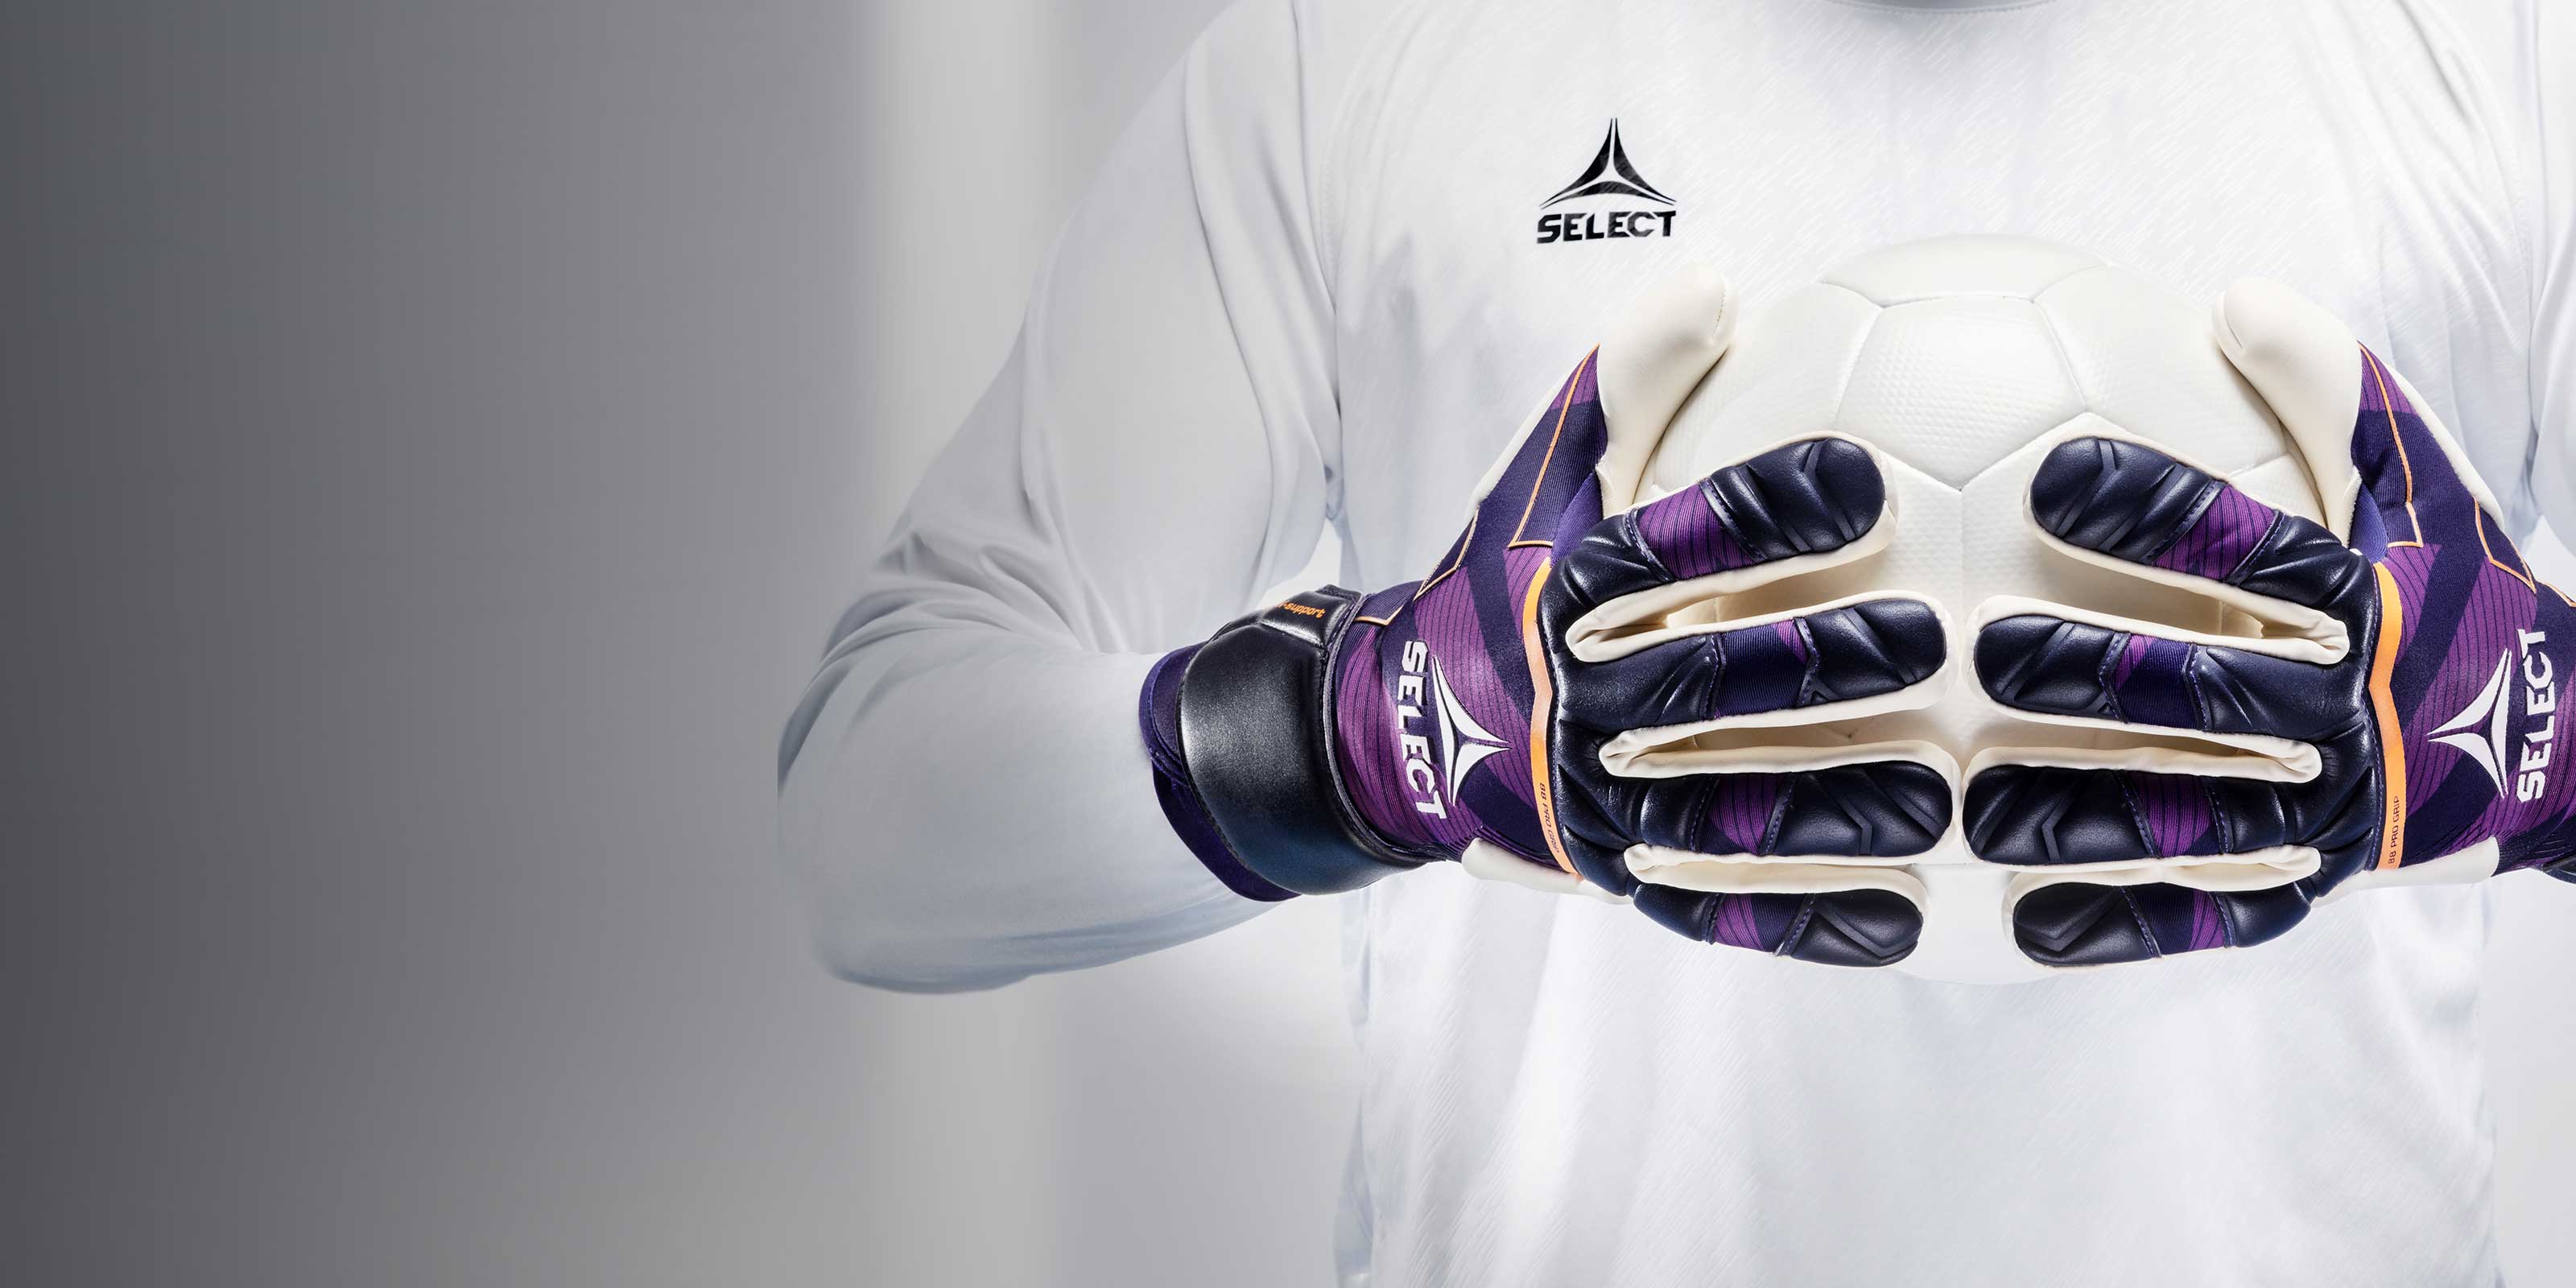 Gloves for professionals